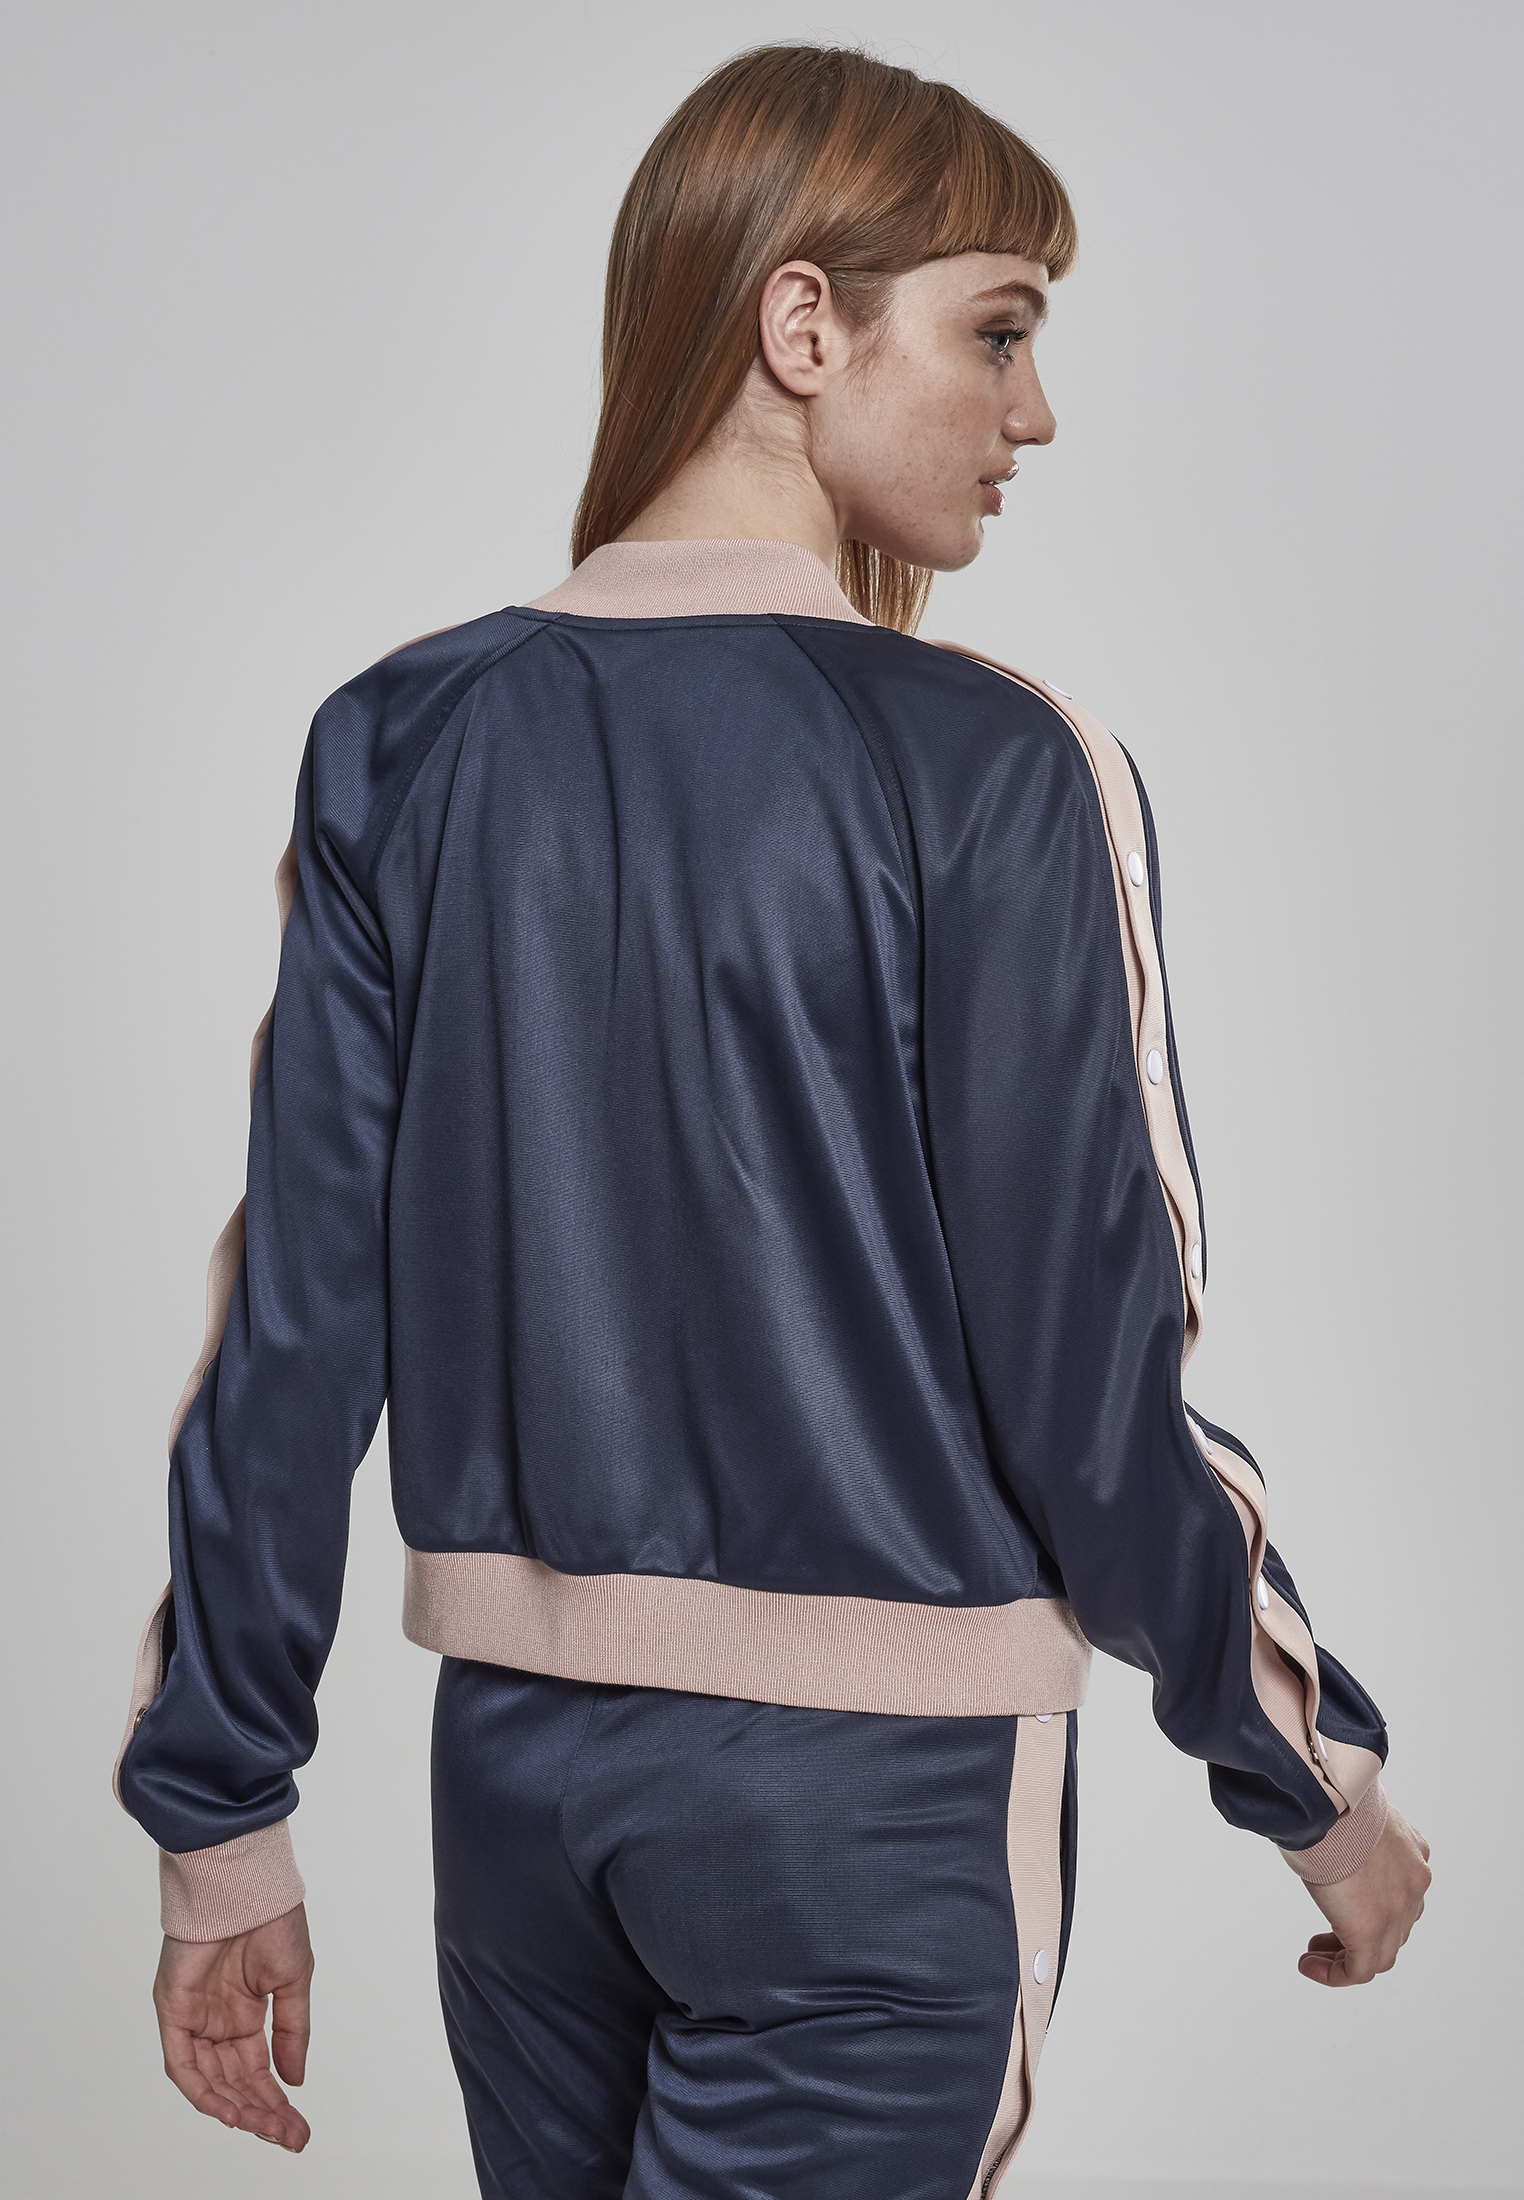 Light Jackets Ladies Button Up Track Jacket in Farbe navy/lightrose/white